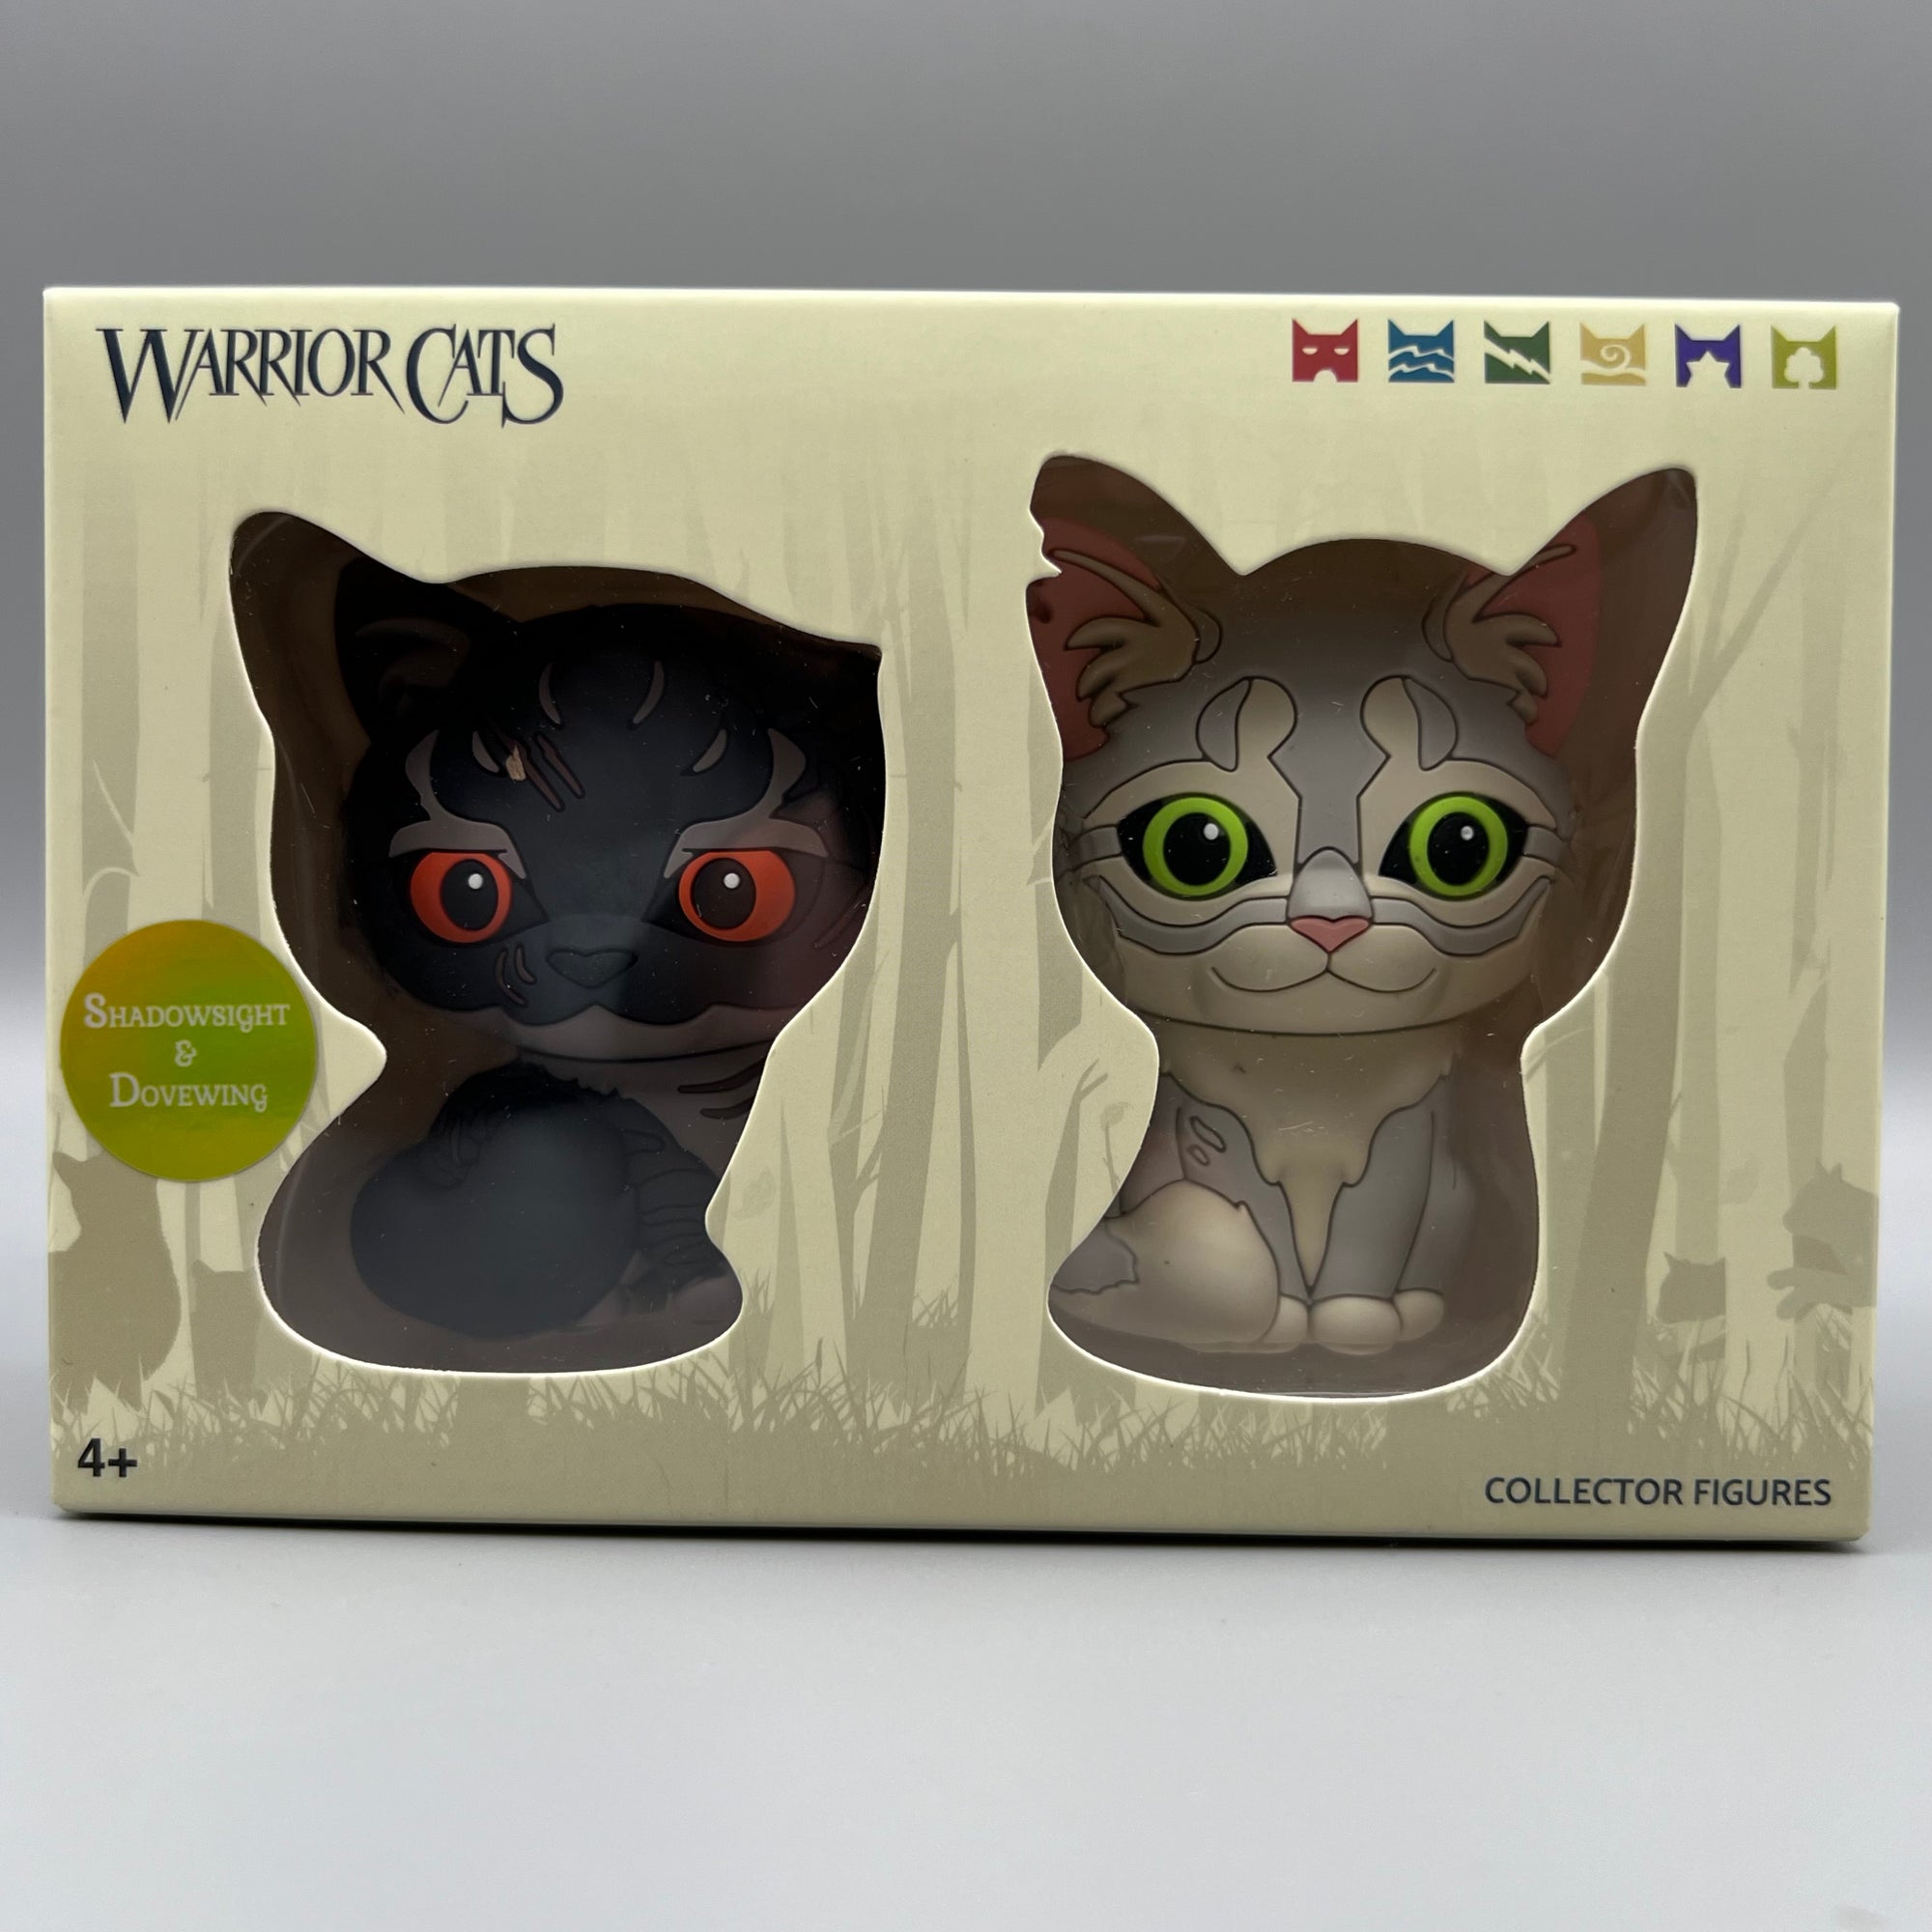 Gallery of Warrior Cat projects on Scratch website